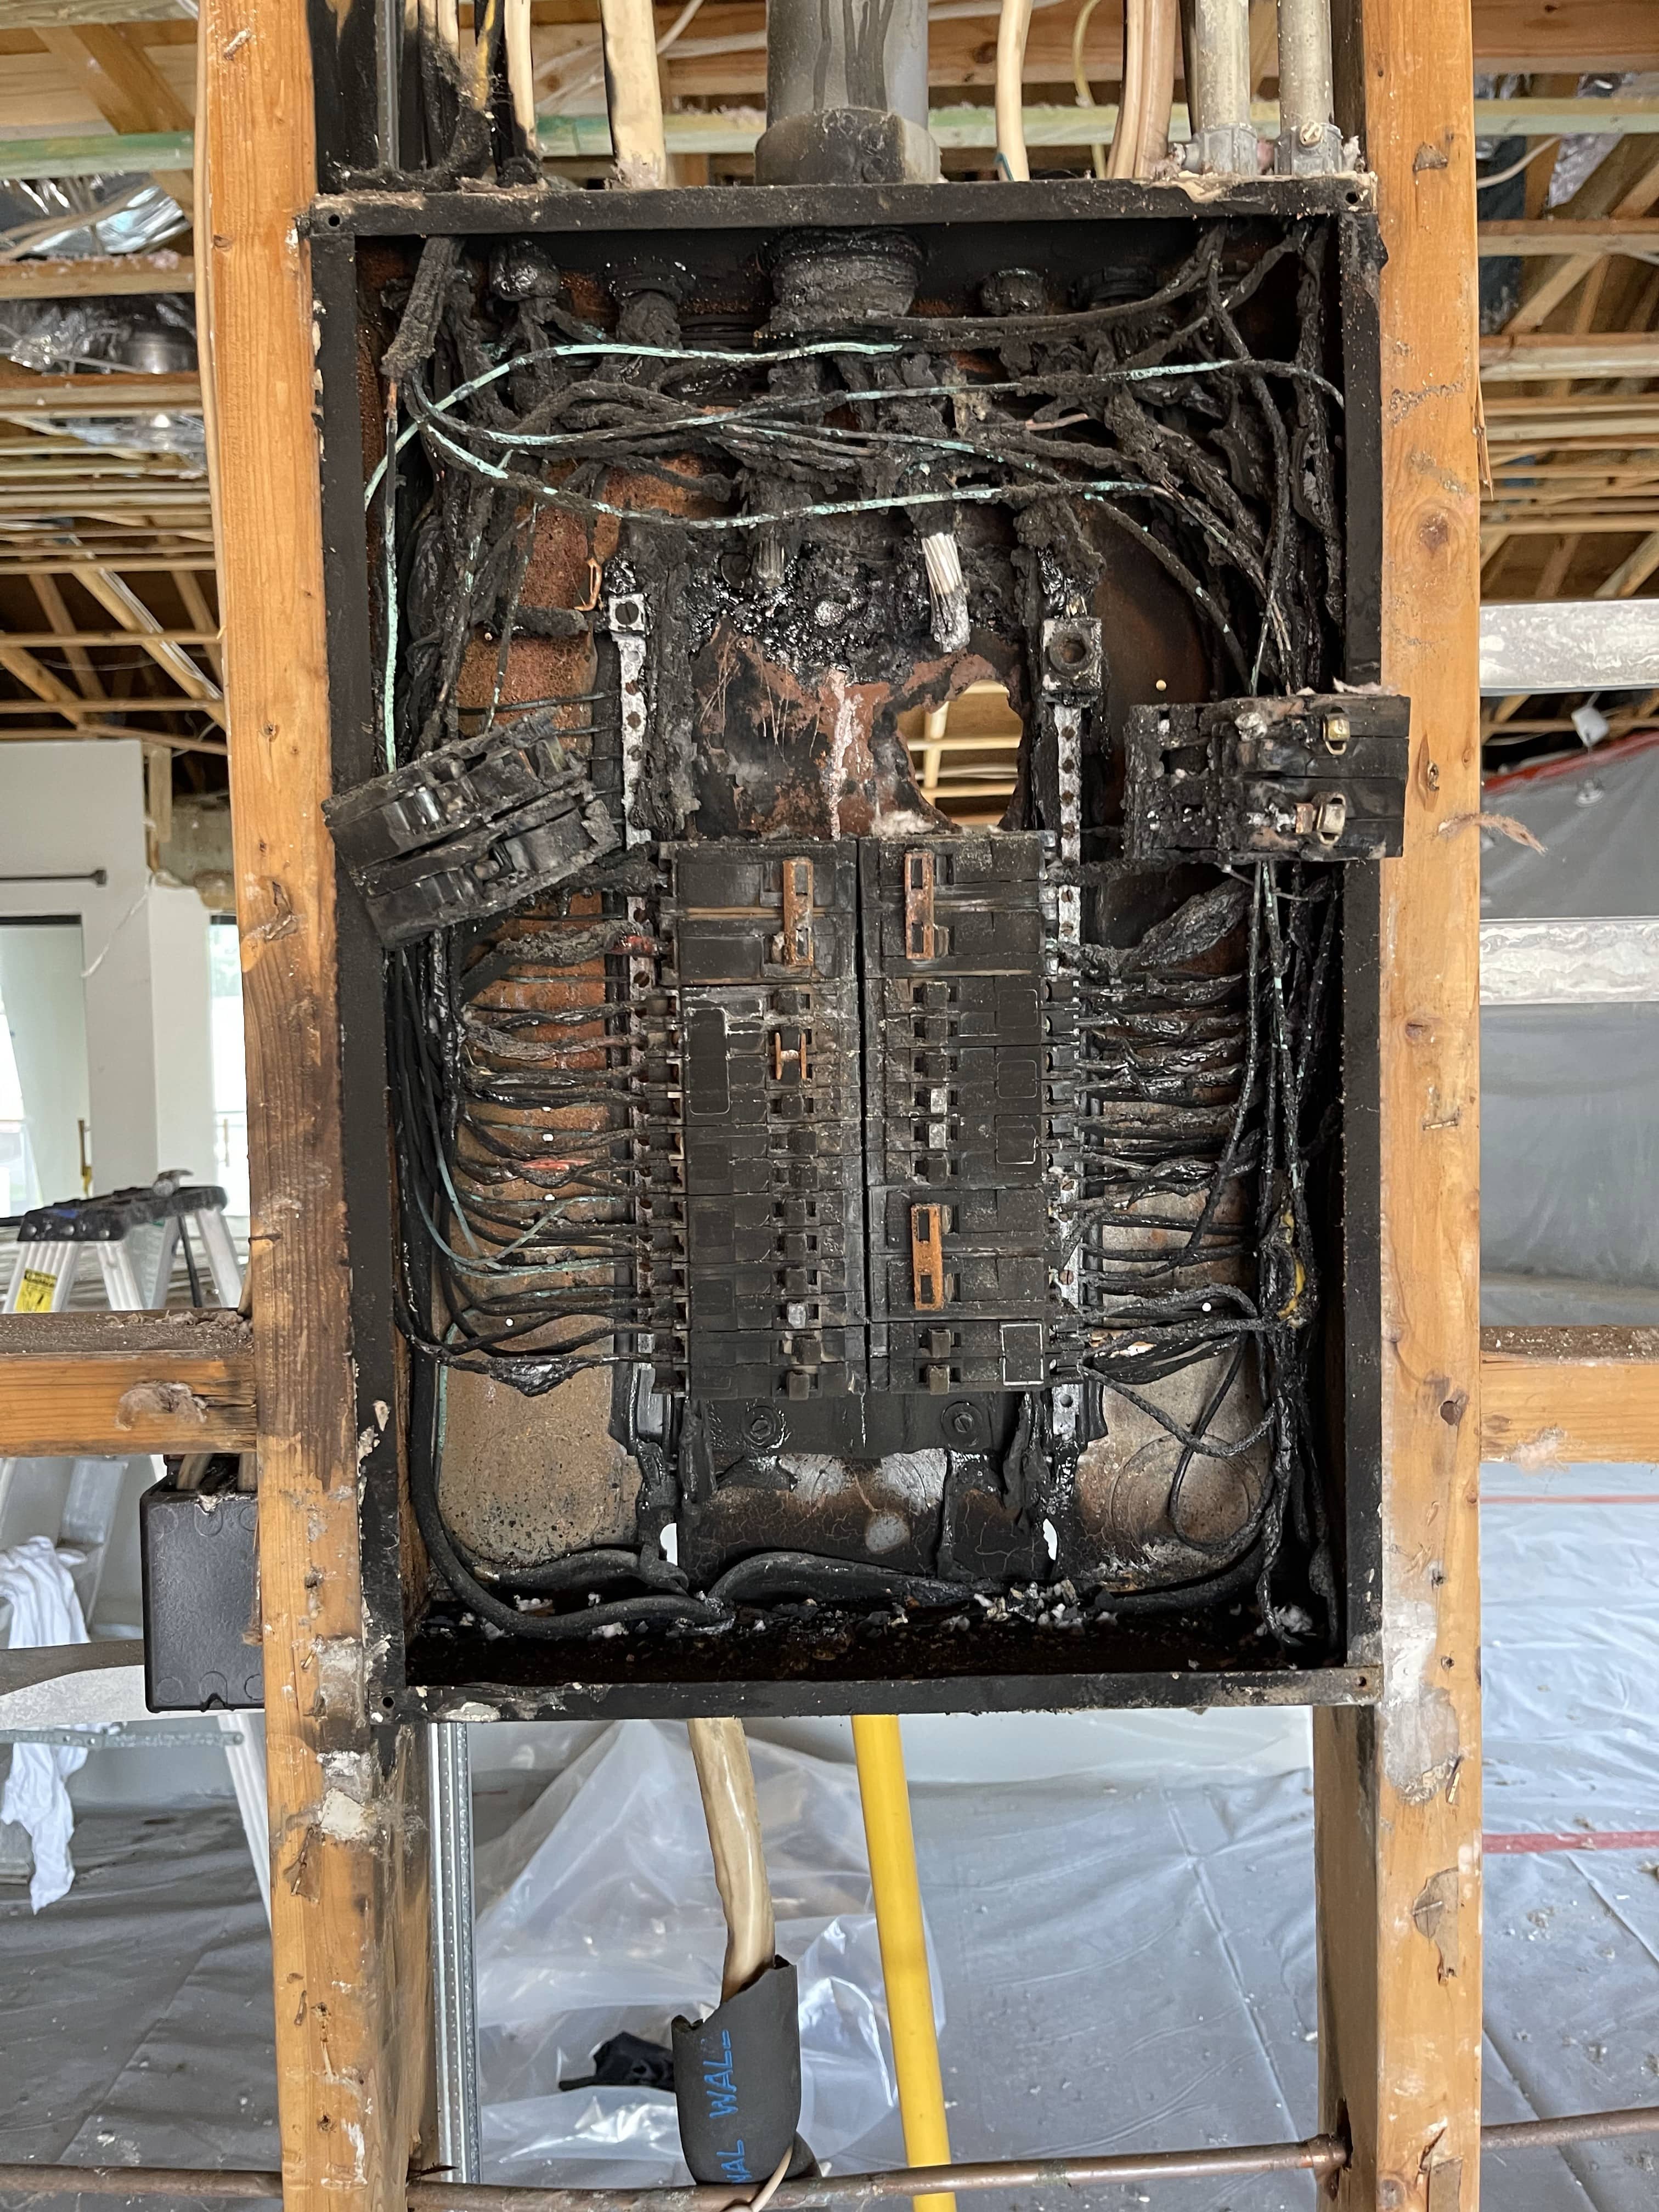 Overheated Electric Panel Catches on fire. Electric fire.